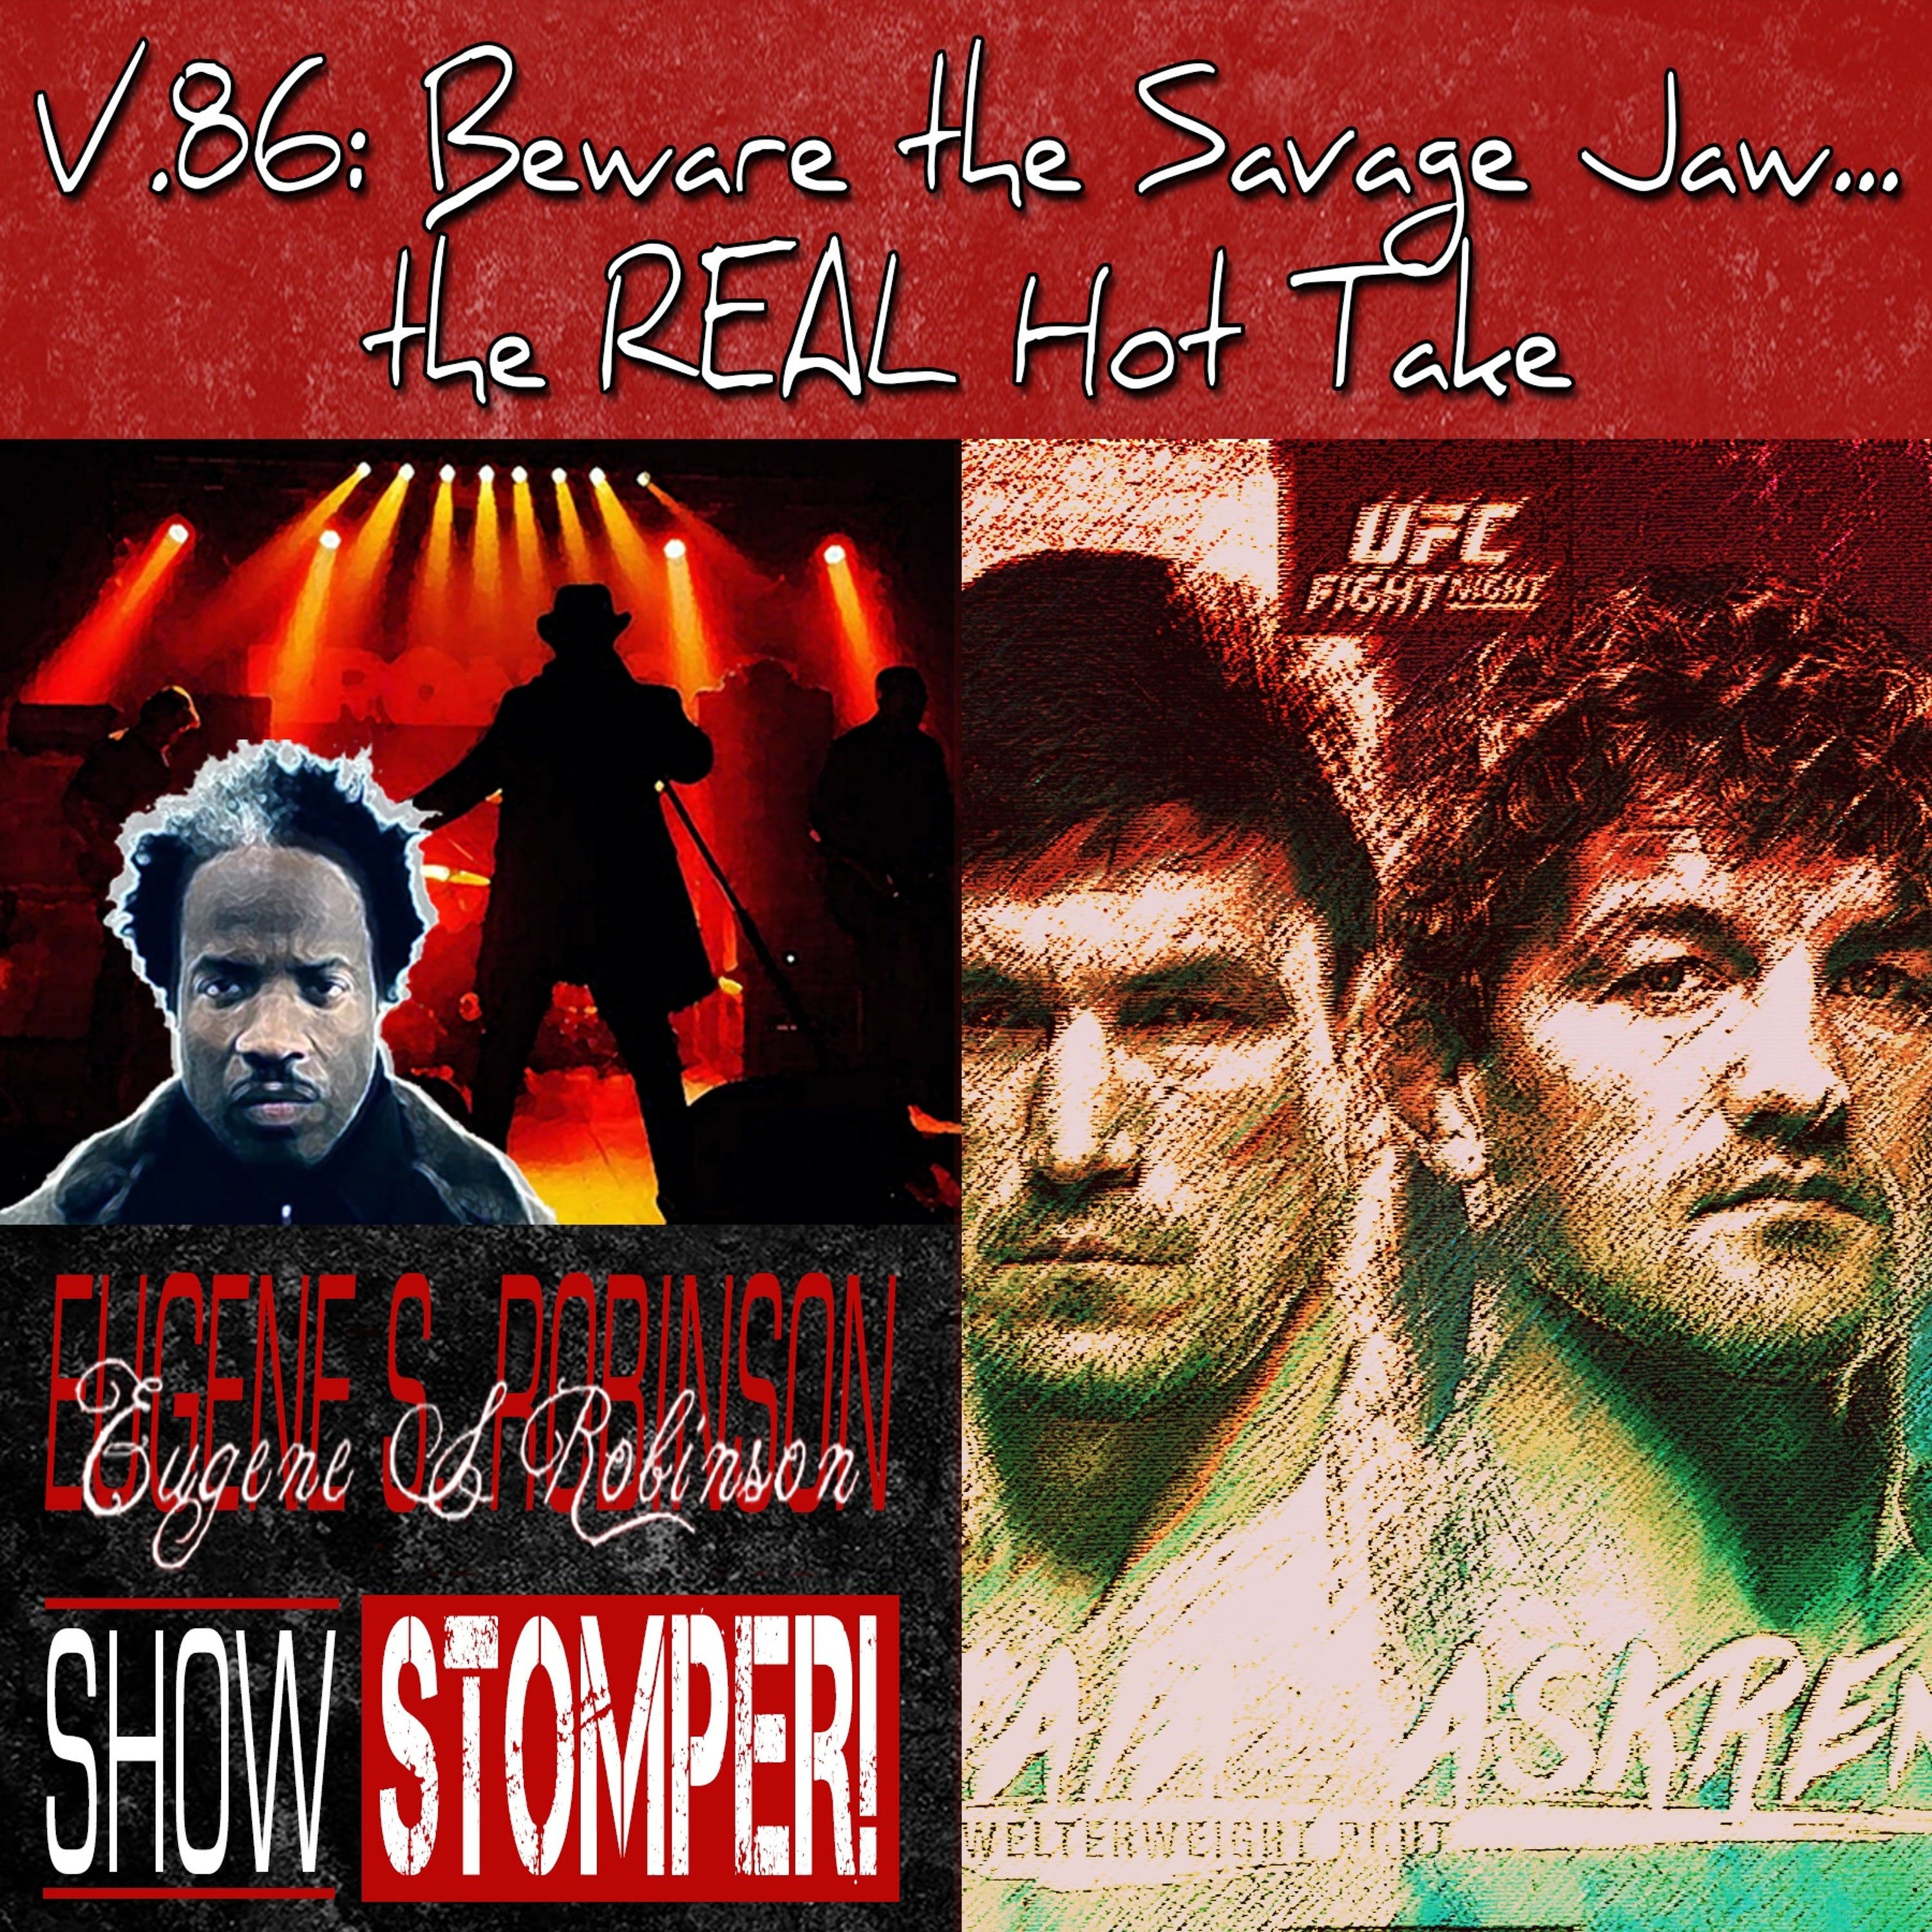 V.86 Beware The Savage Jaw...the REAL Hot Take On The Eugene S. Robinson Show Stomper!